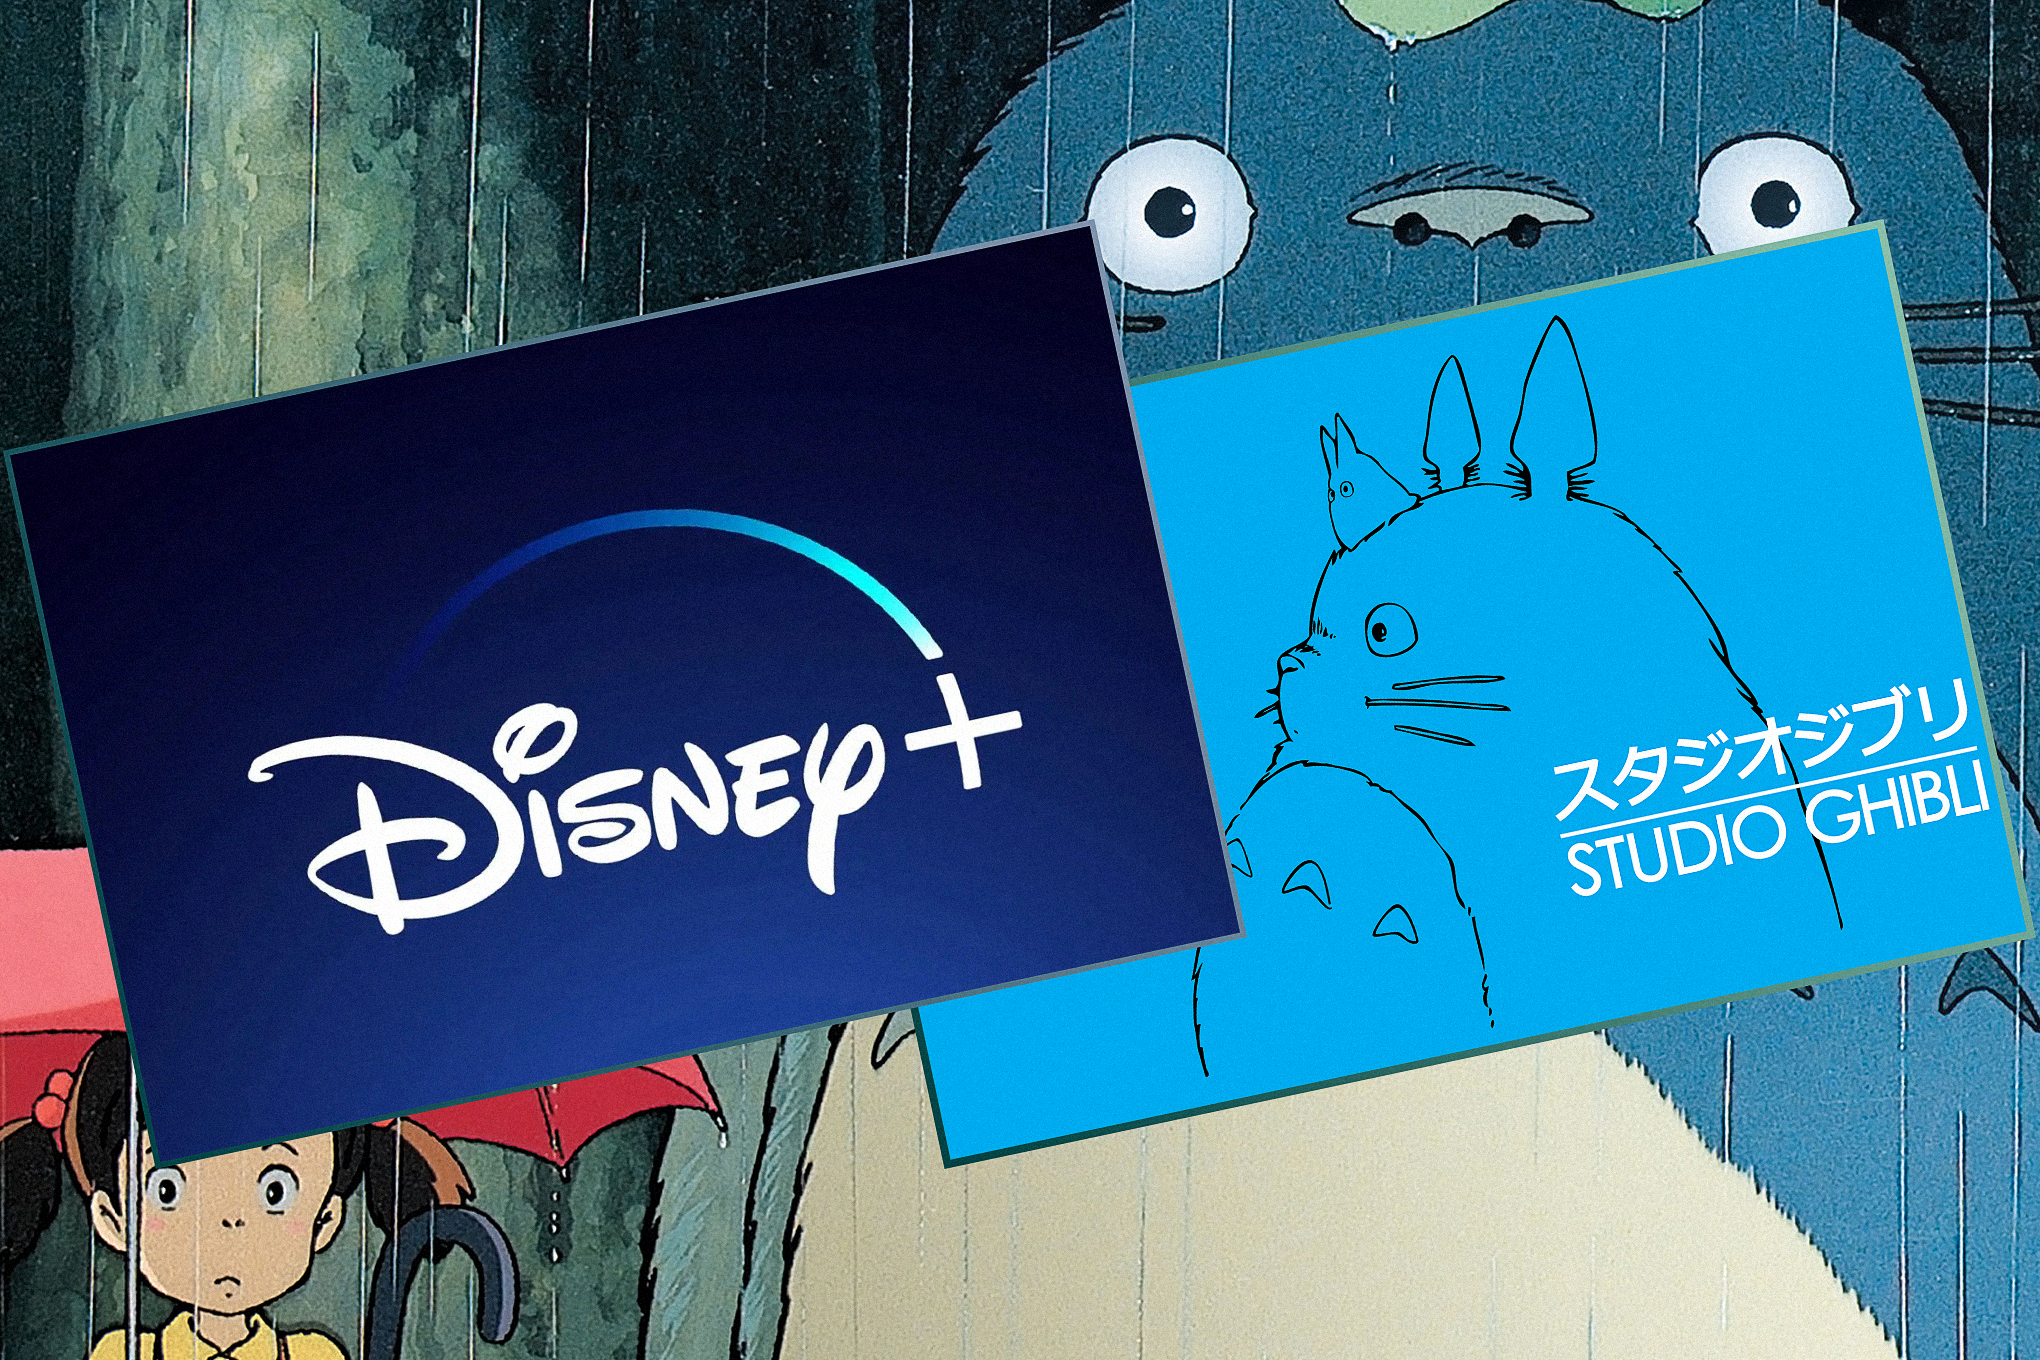 Still from Studio Ghibli movie ”My friend Tortoro” overlaid with two angled rectangles containing, one containing a Disney Plus logo and the other a Studio Ghibli logo